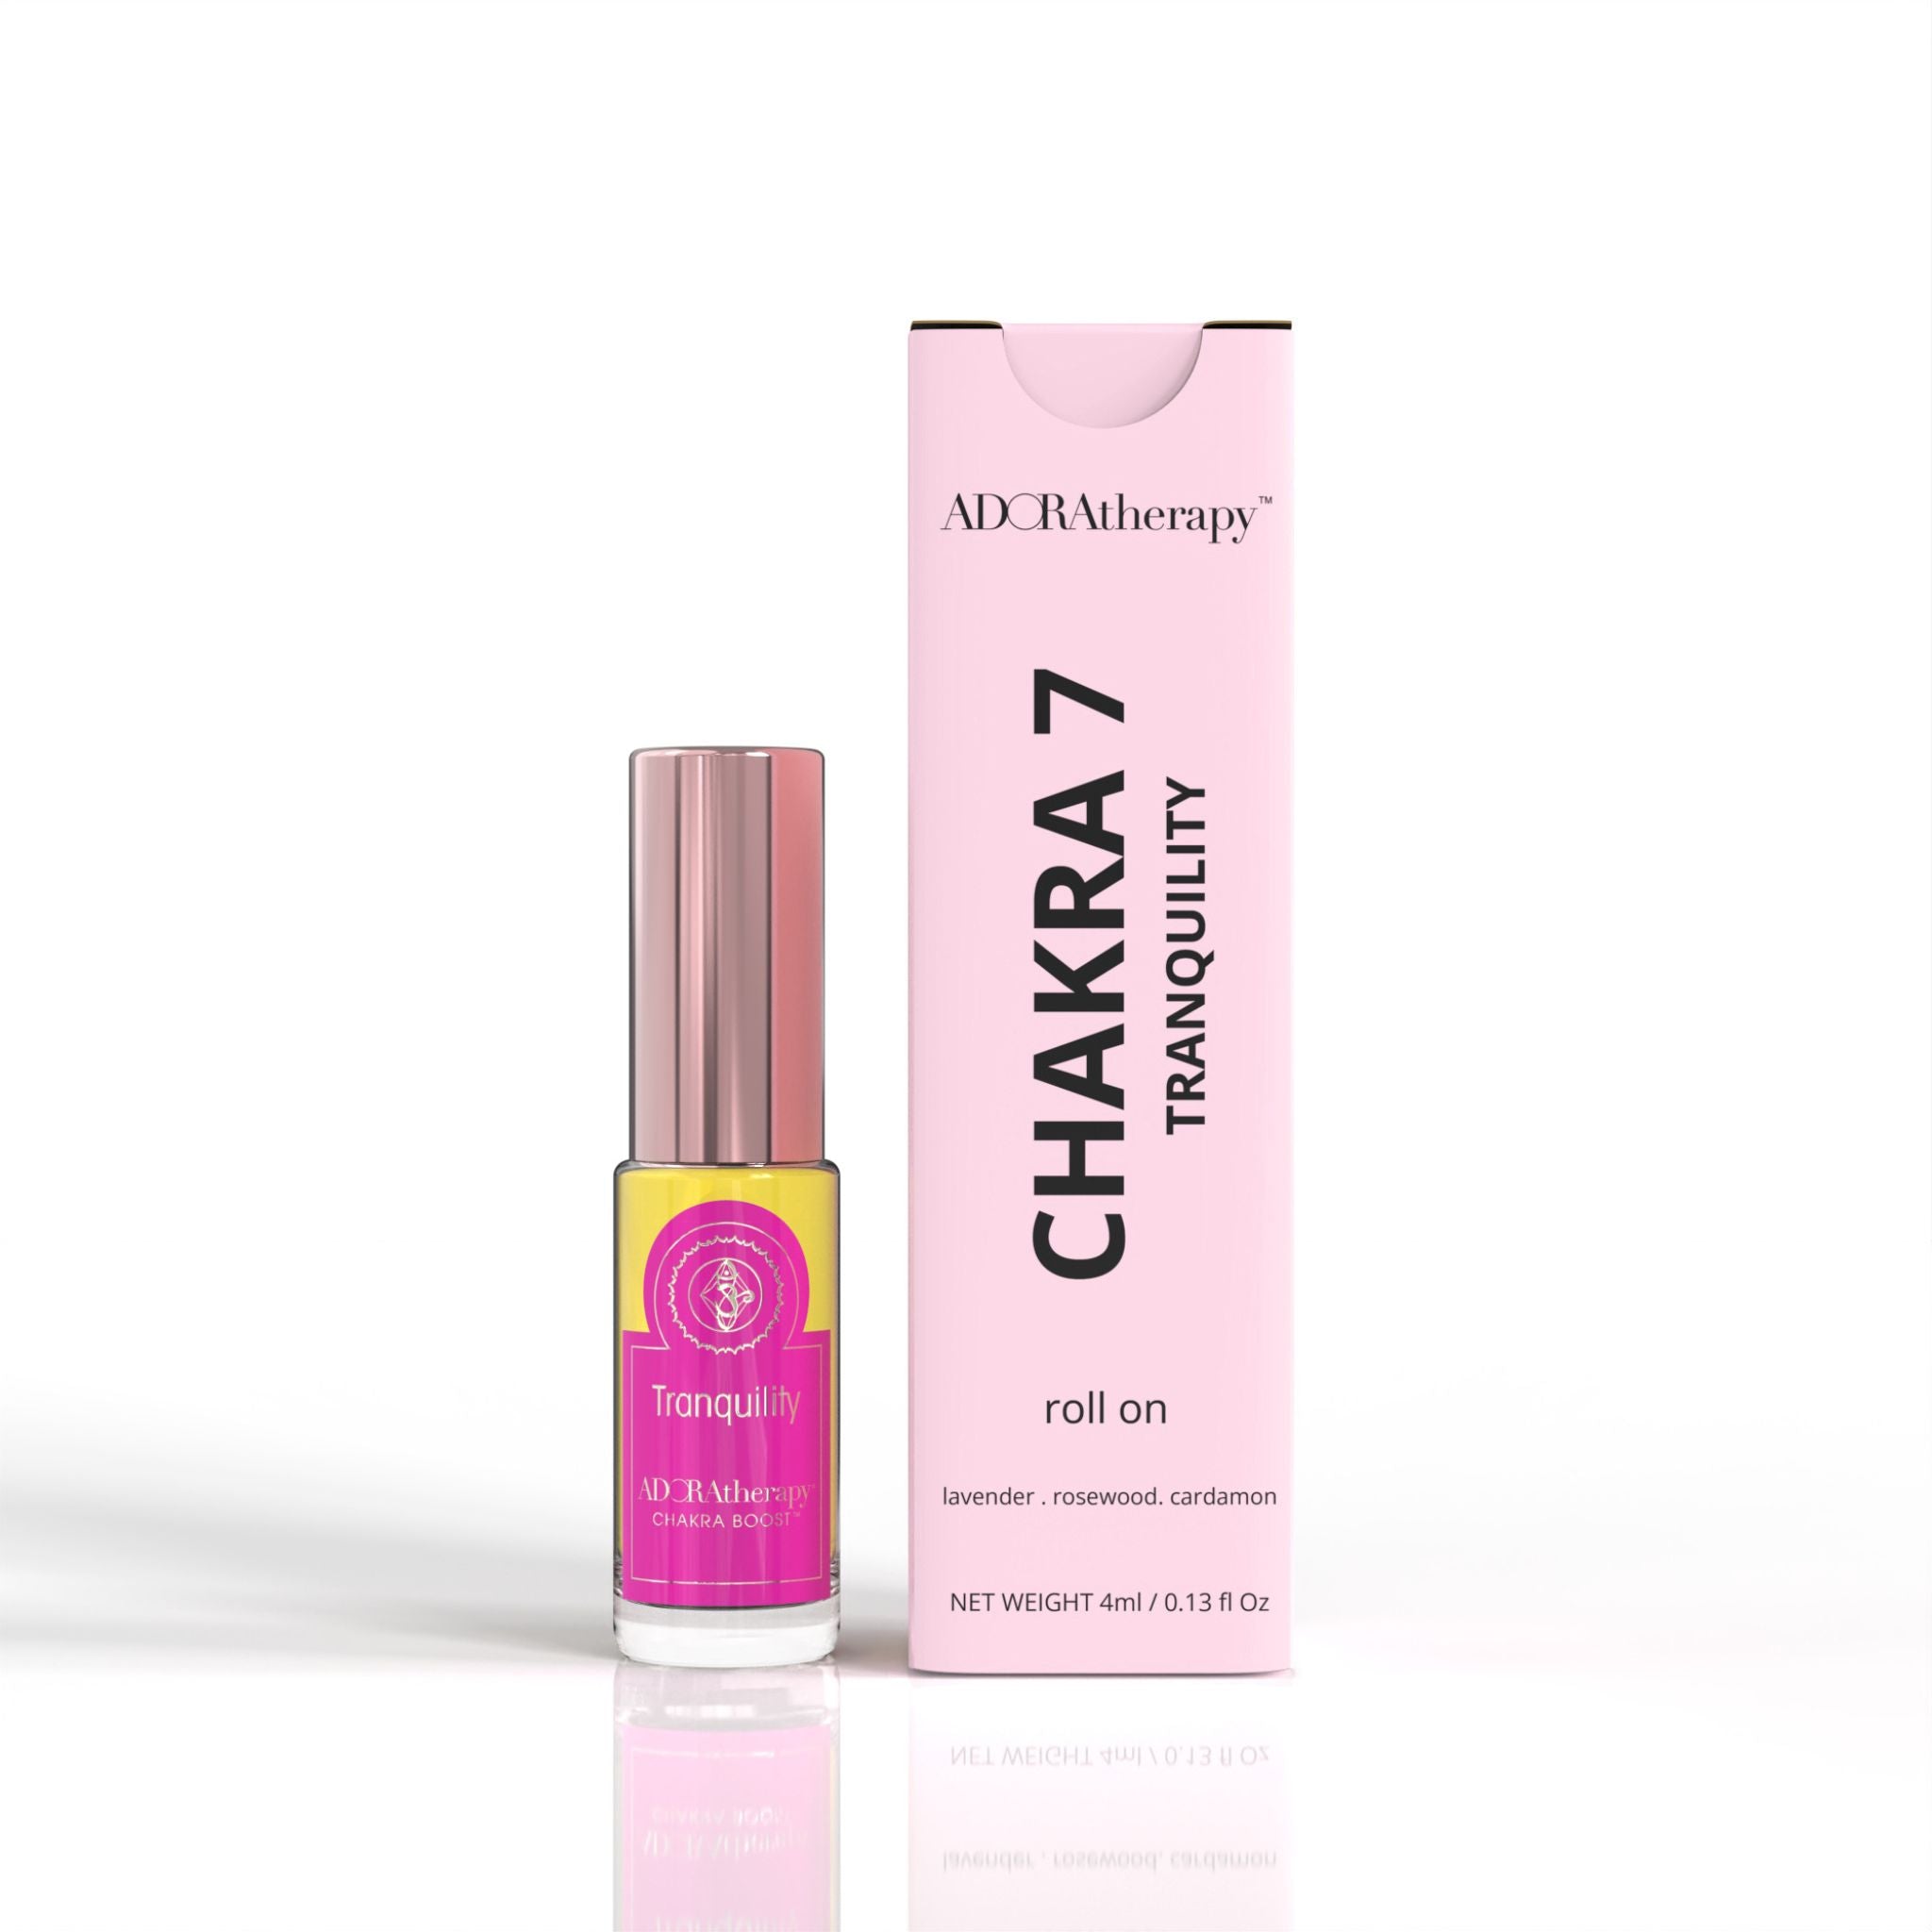 Chakra 7 Tranquility Roll On Perfume Oil by ADORAtherapy